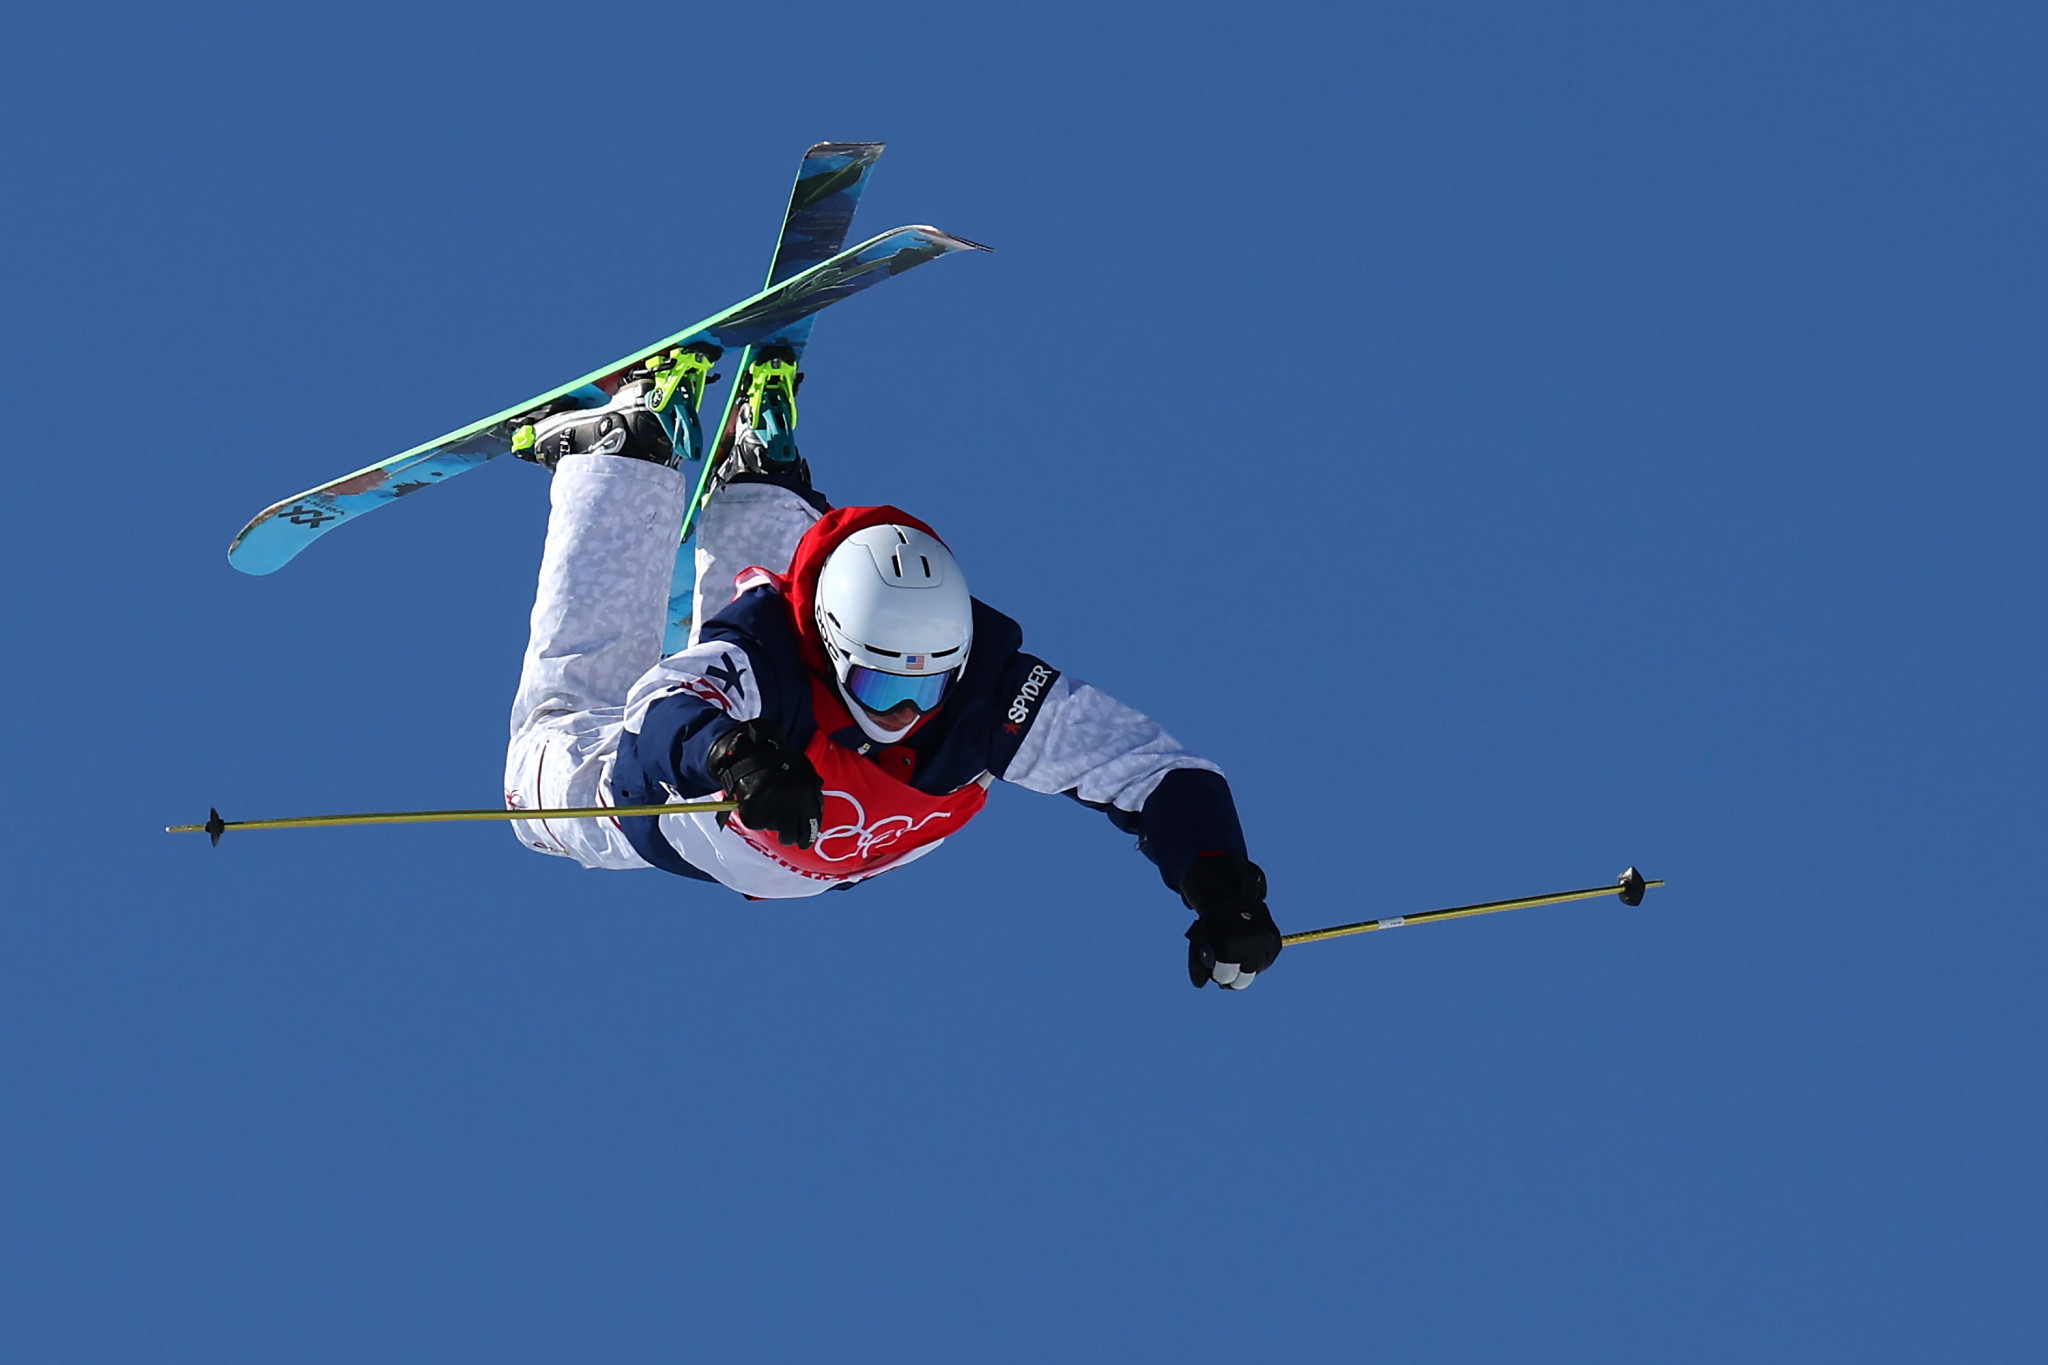 Three-time Olympic medallist Goepper retires from freestyle skiing